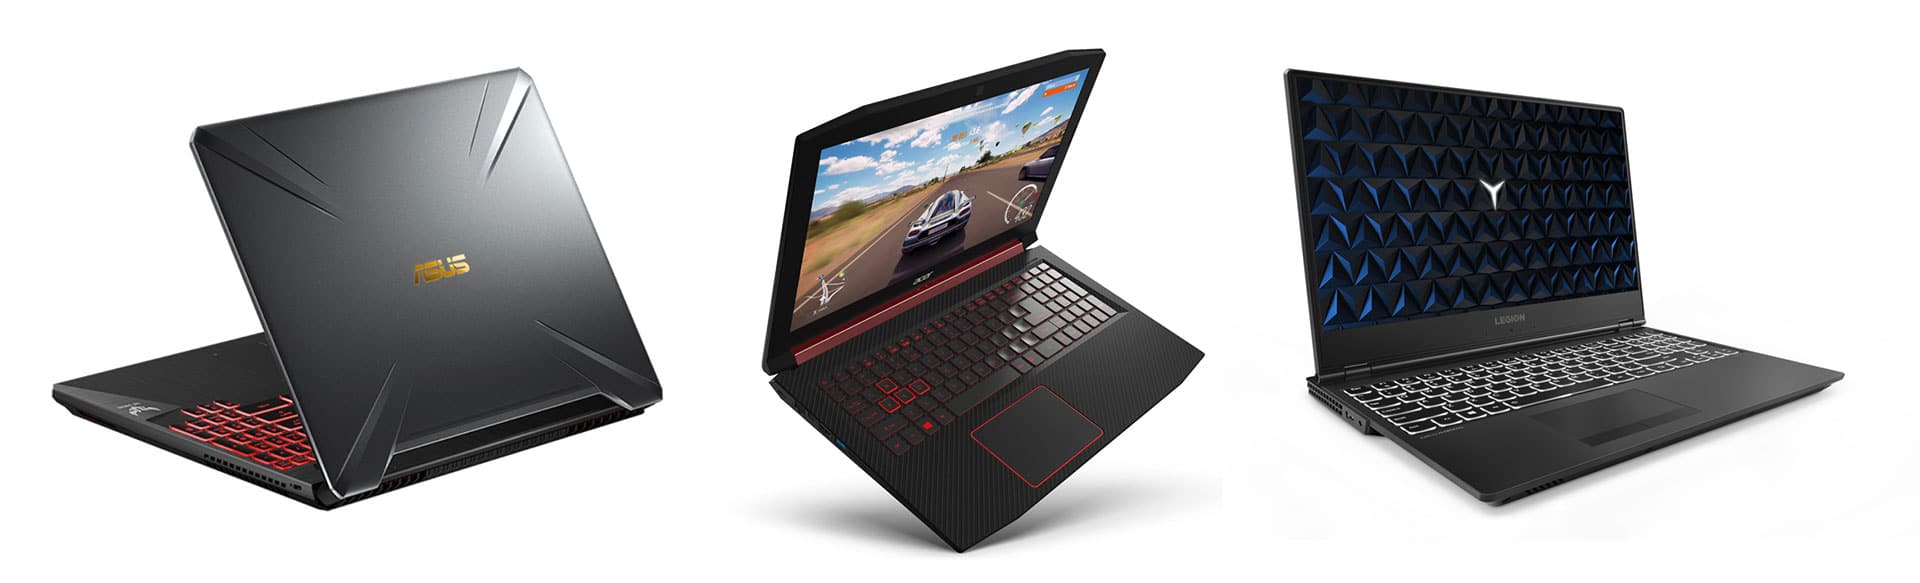 Some of the better budget gaming laptops: Asus TUF FX505, Acer Nitro 5 and Lenovo Legion Y530